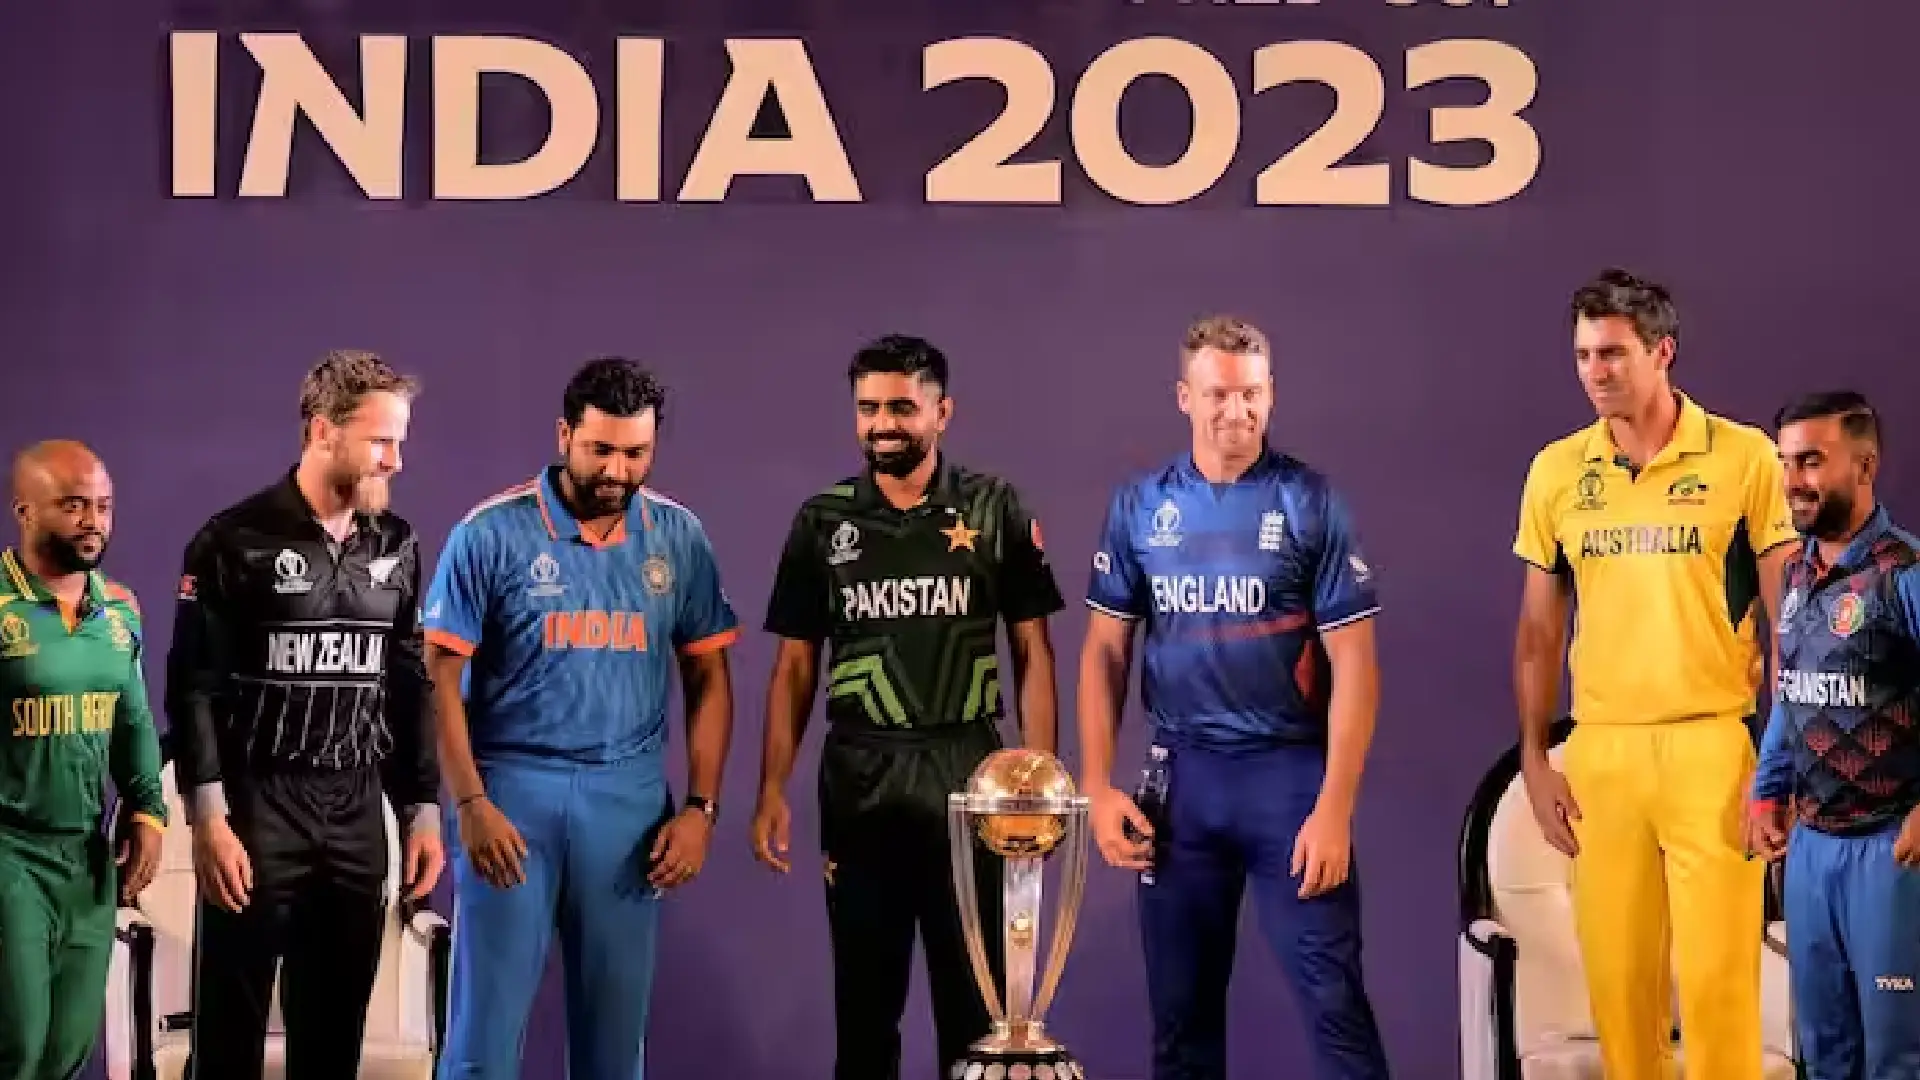 World Cup 2023: Captains Unite, Anticipate, and Celebrate the ICC ODI Cricket Spectacle - PUNE NEWS